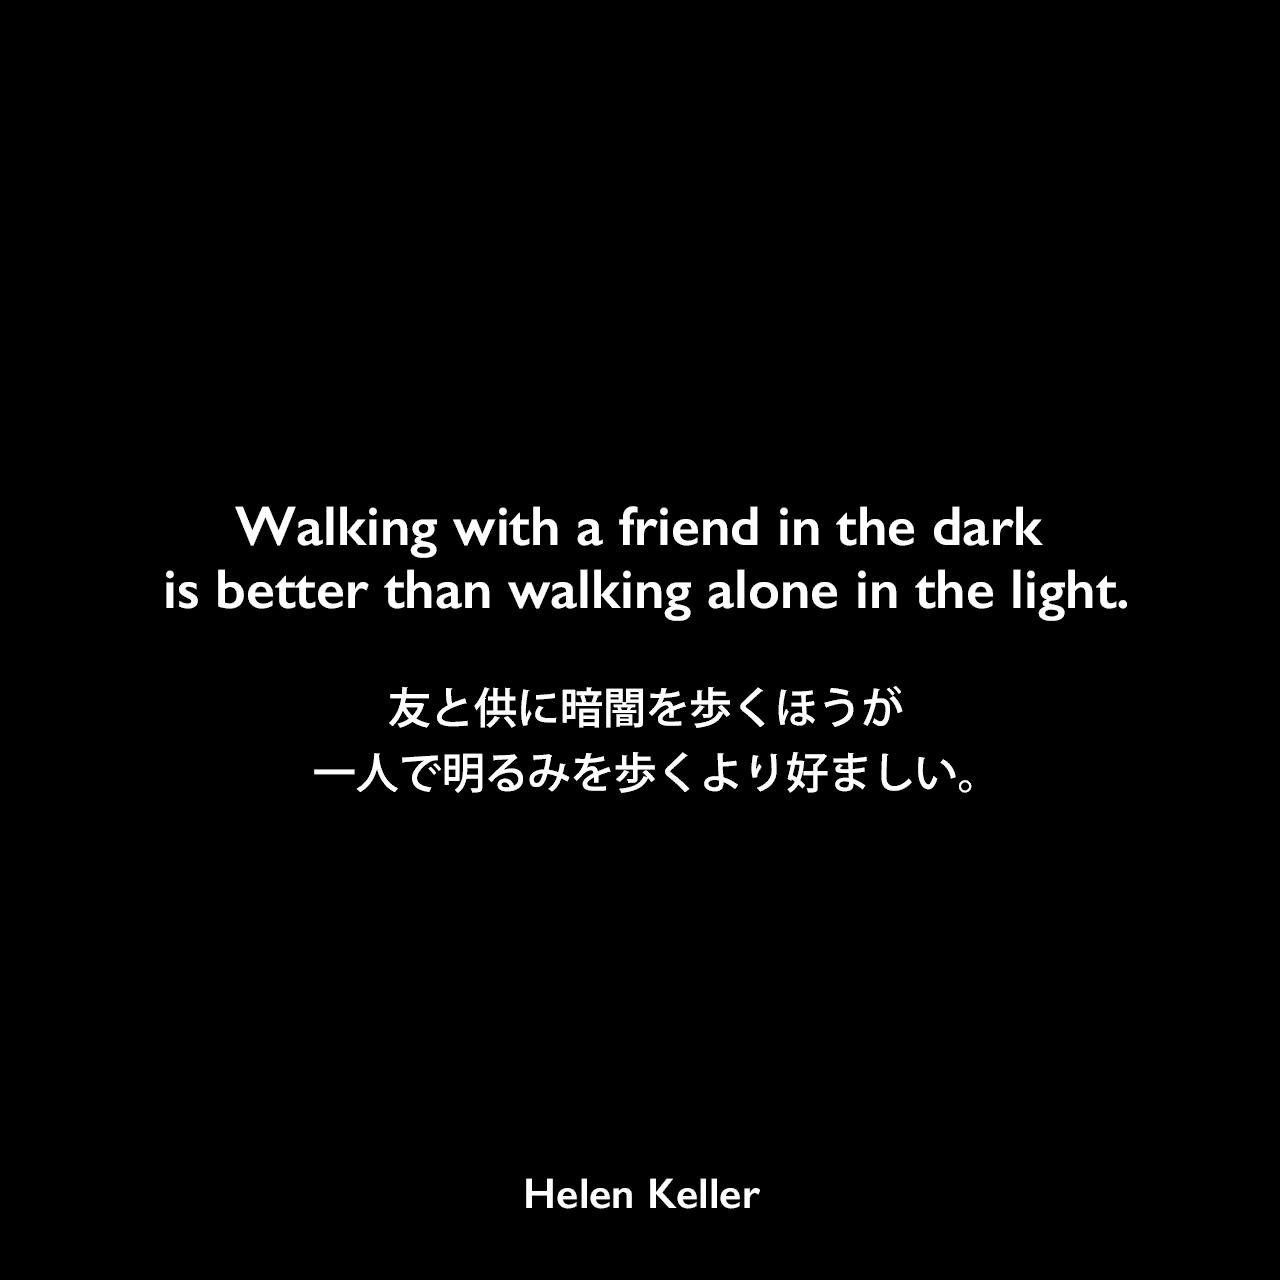 Walking with a friend in the dark is better than walking alone in the light.友と供に暗闇を歩くほうが、一人で明るみを歩くより好ましい。